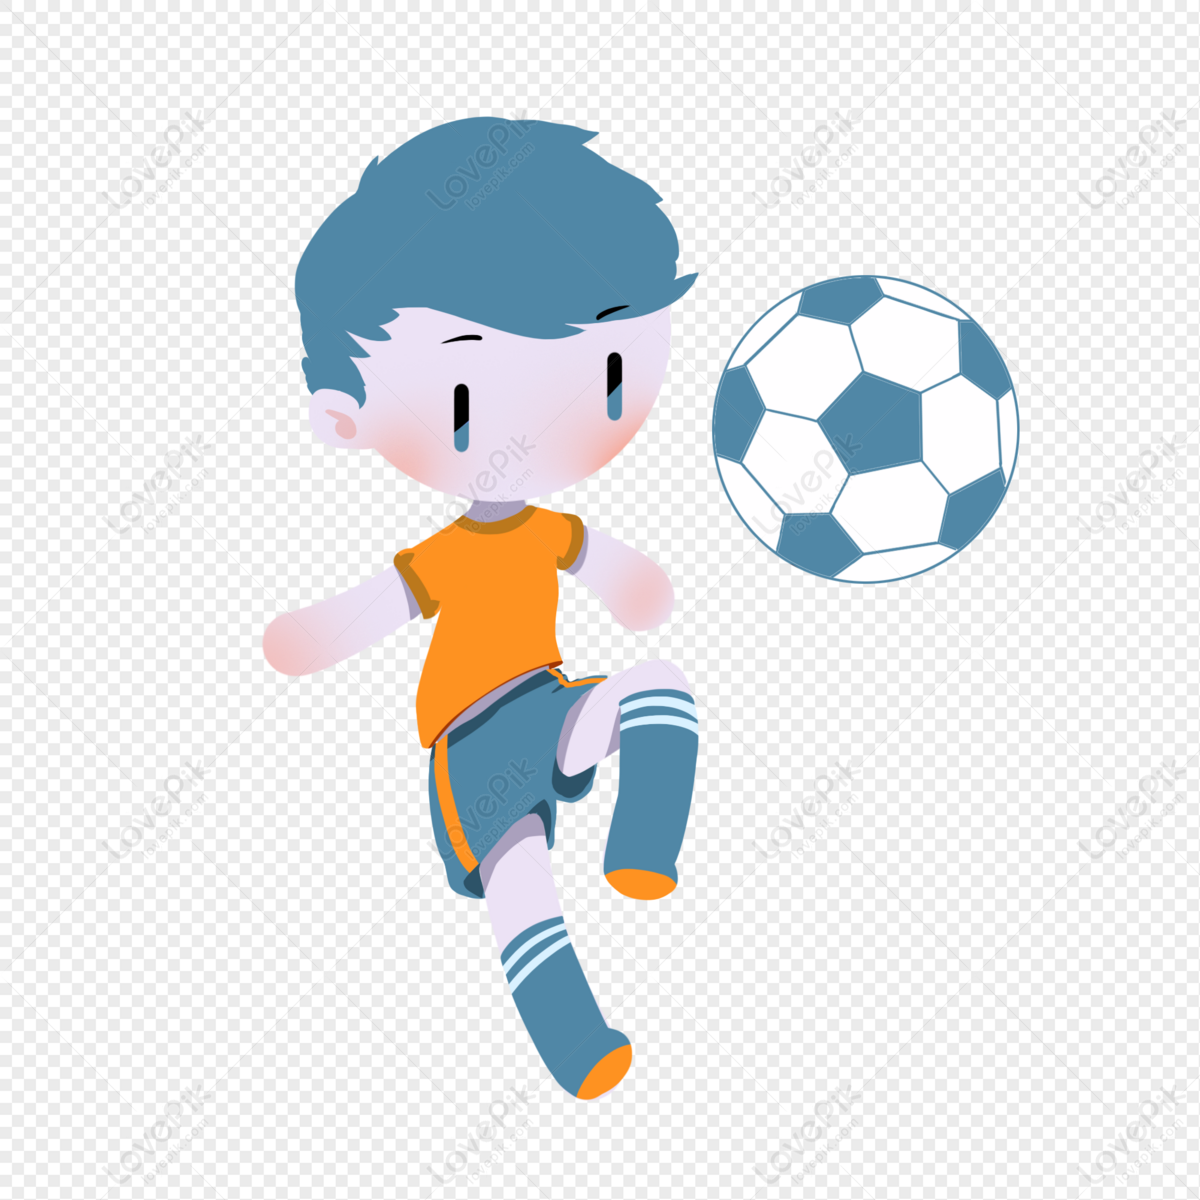 Little Boy Playing Football Free PNG And Clipart Image For Free ...